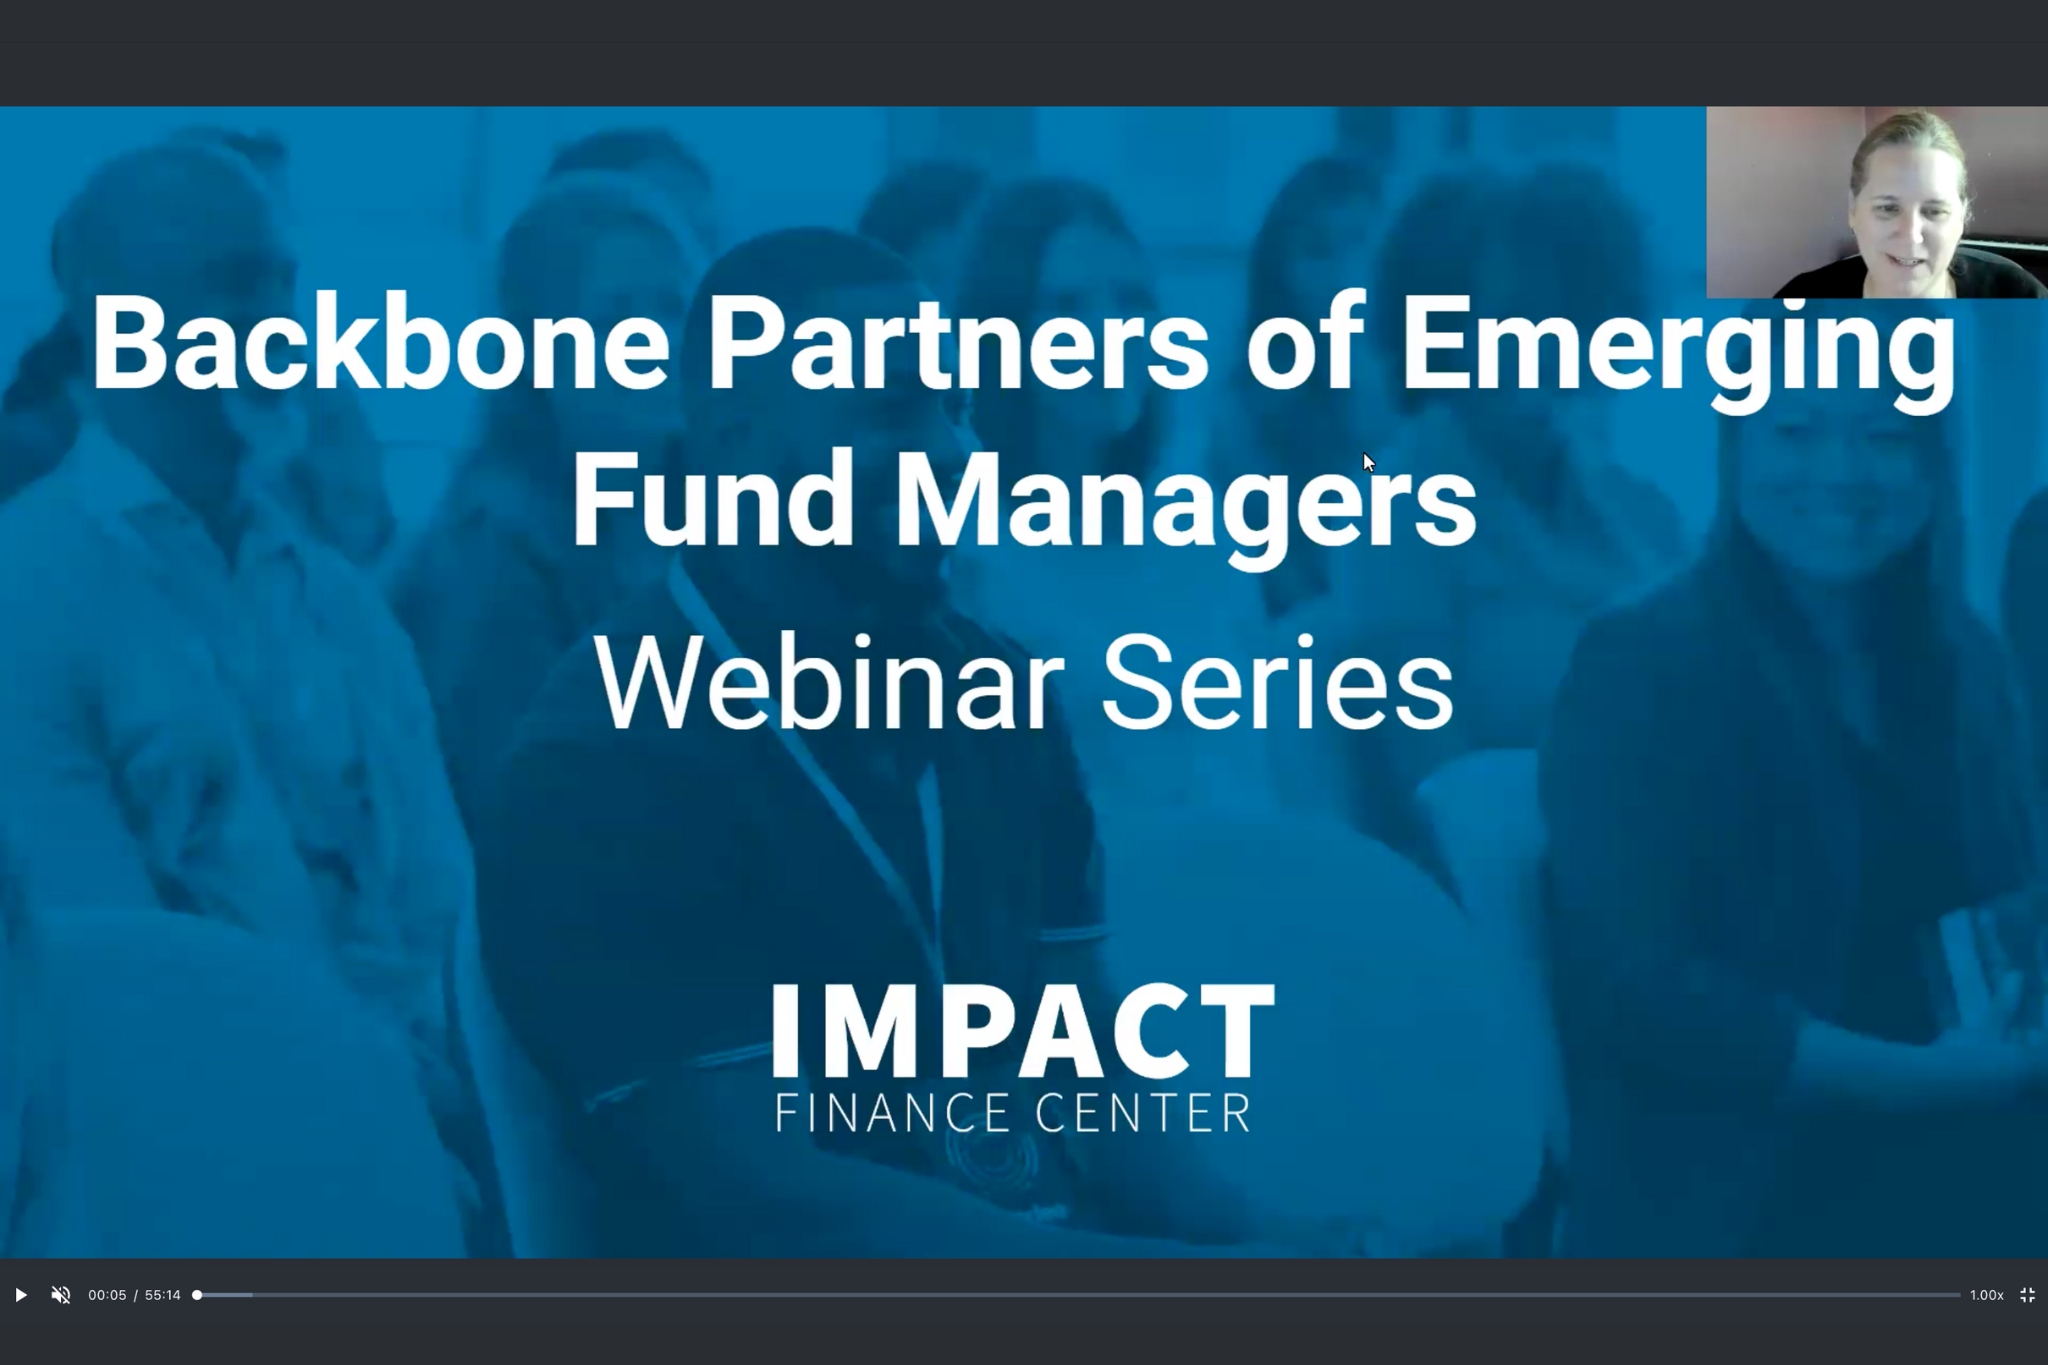 Screenshot of a Zoom recording. Shown is a slide that says "Backbone Partners of Emerging Fund Managers" Webinar Series, Impact Finance Center. In the upper right hand corner is the image of a person speaking.